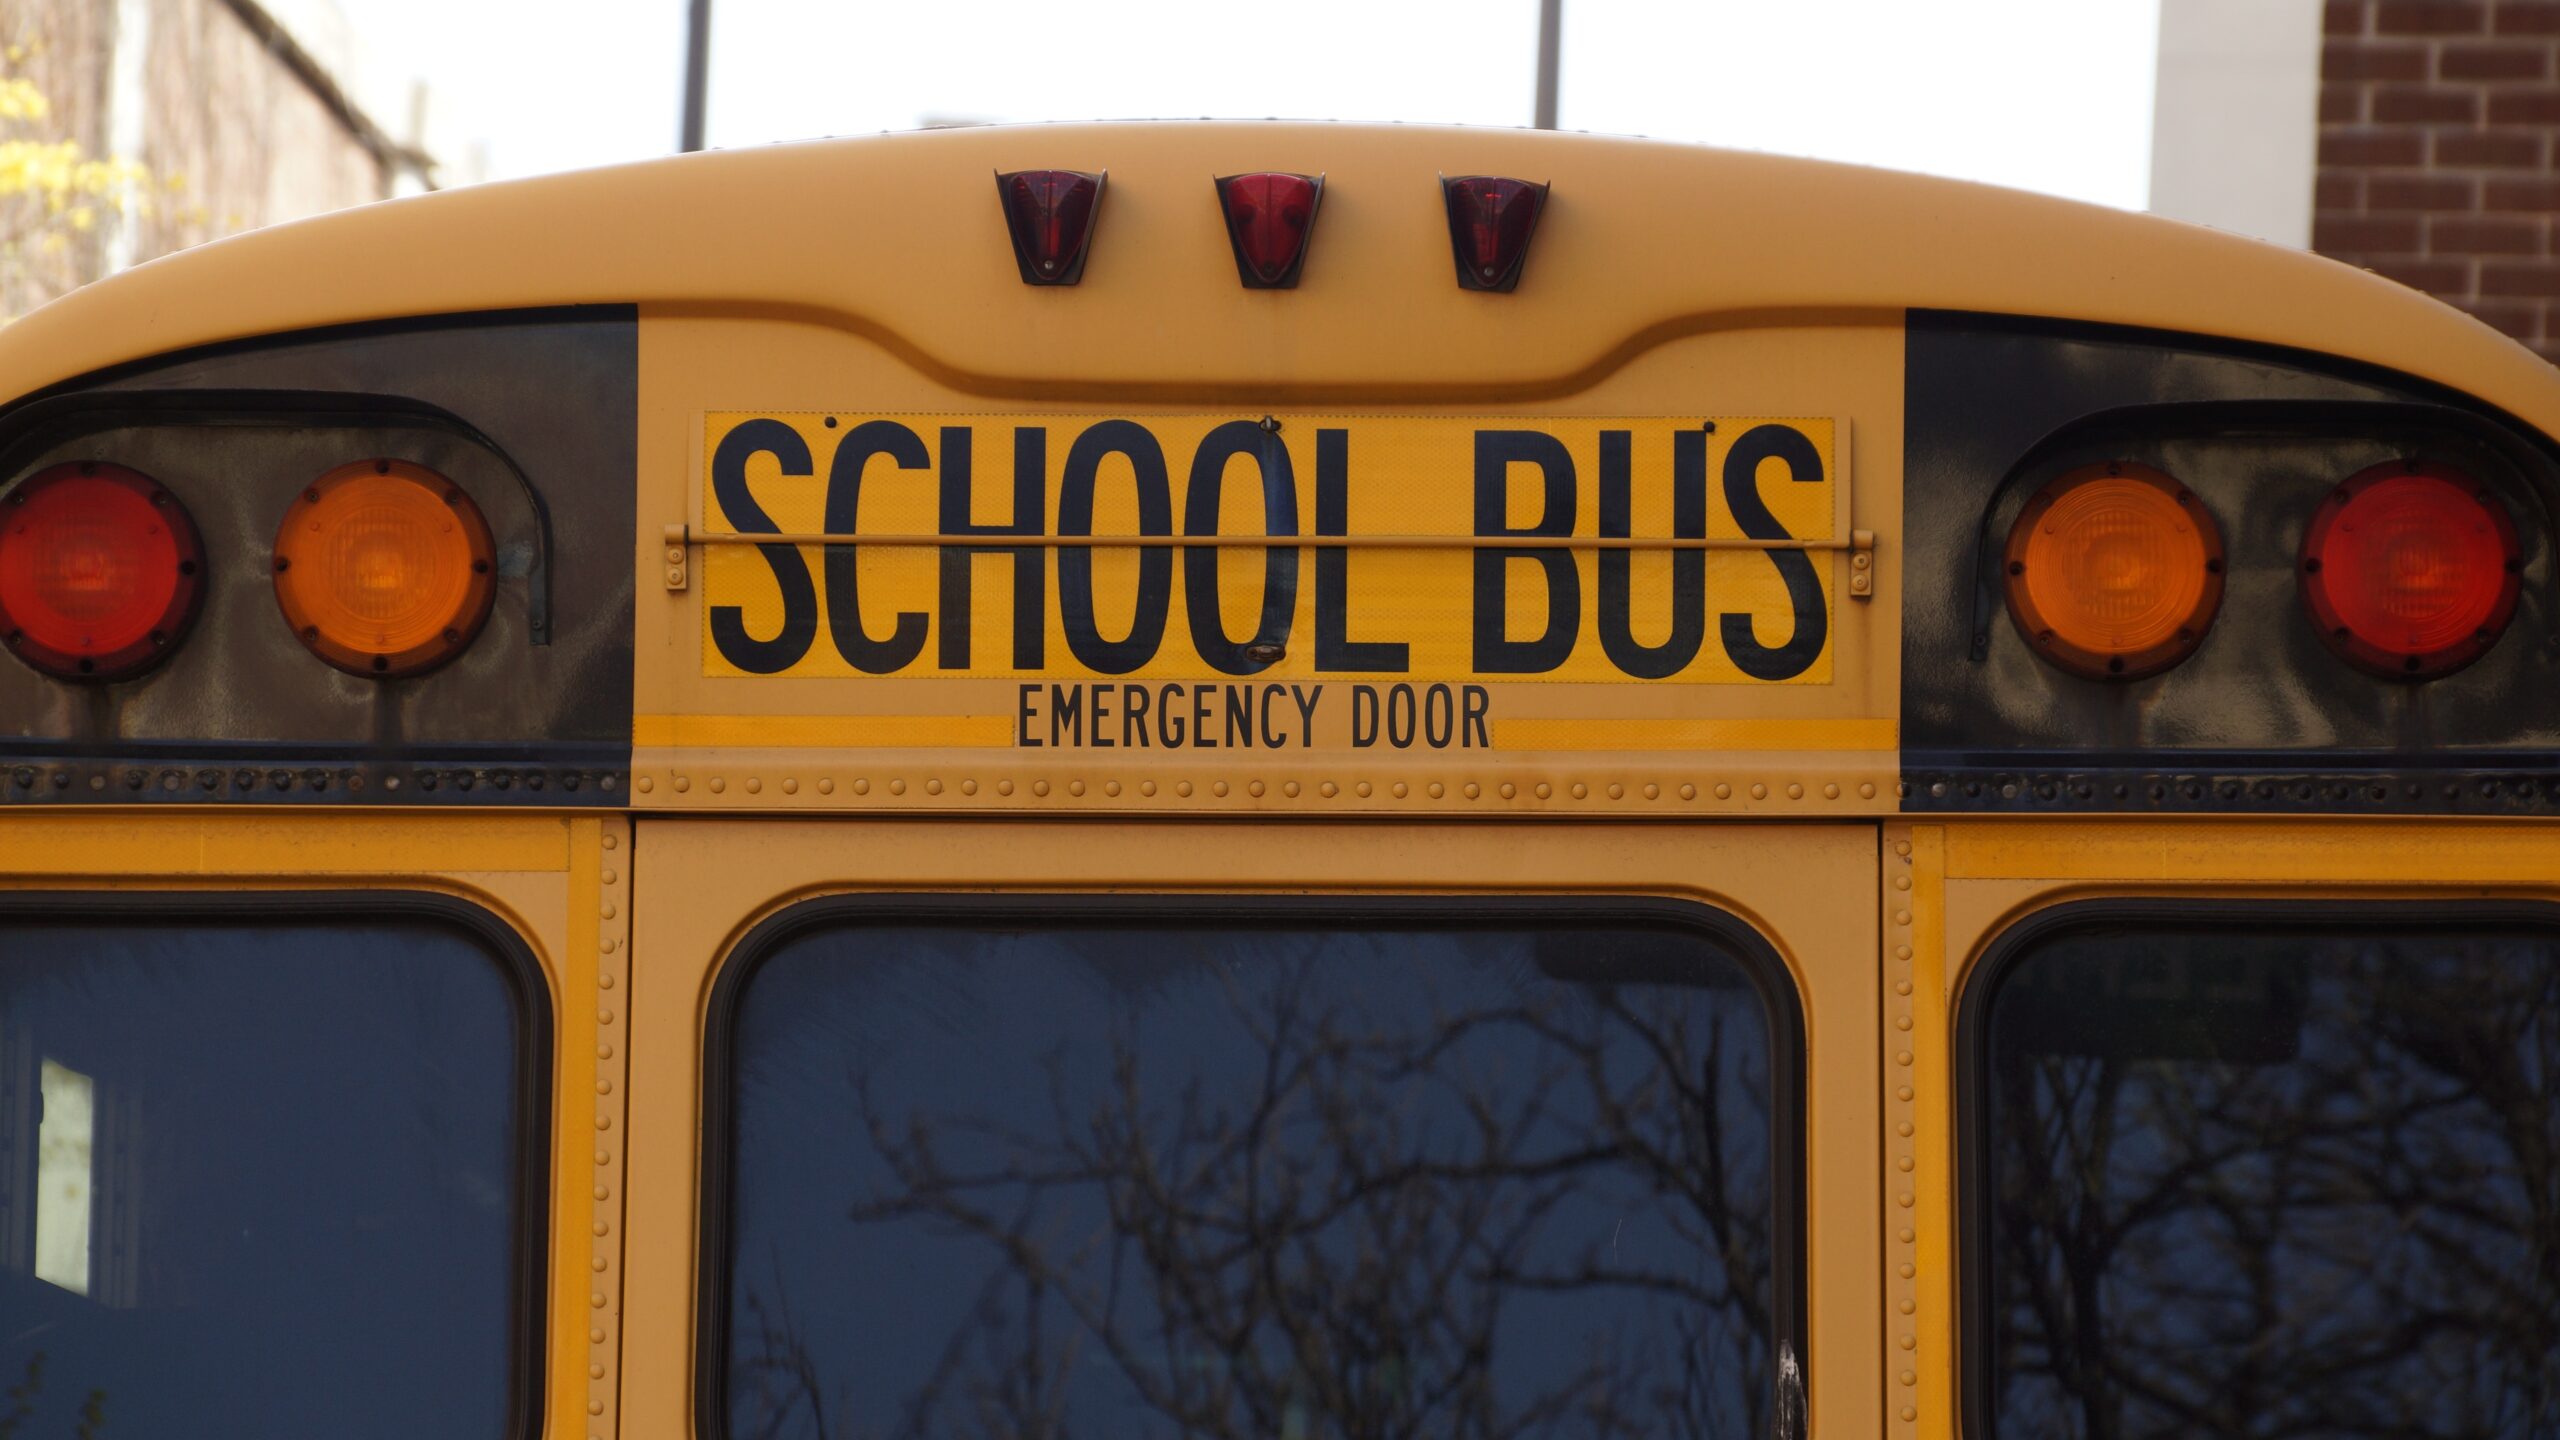 Close-up of the back of a school bus showing the upper section with 